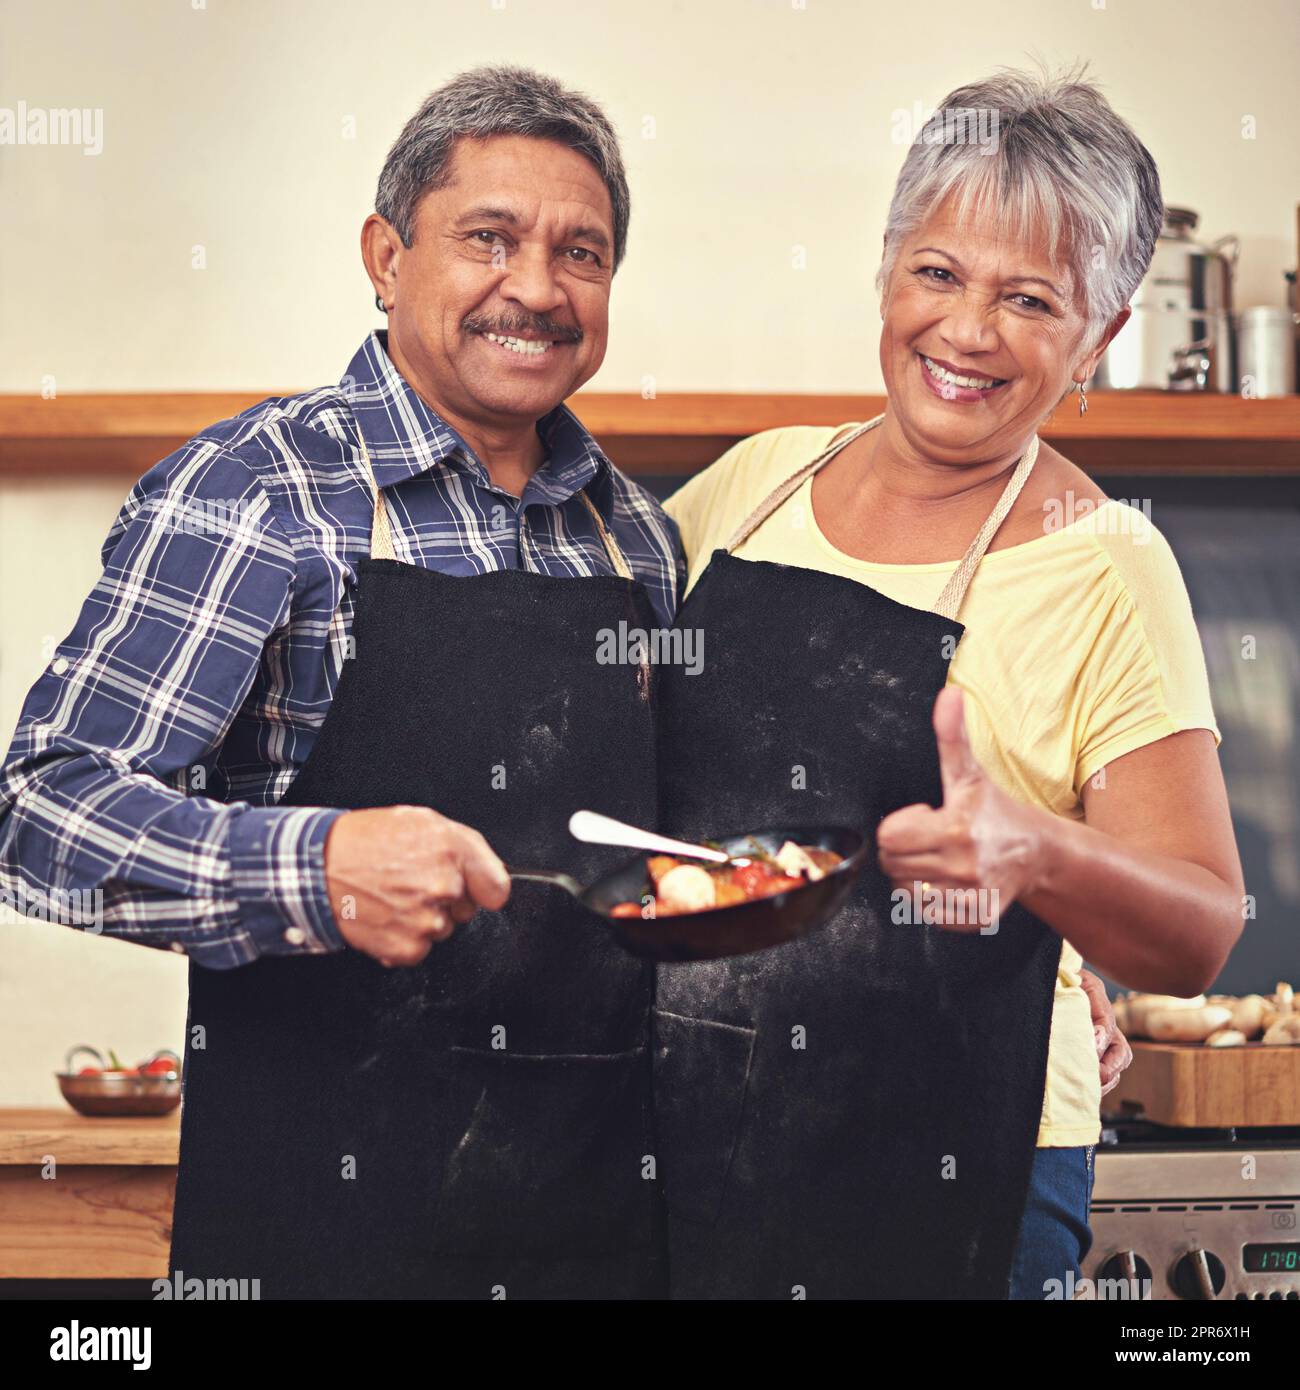 Dinner is served. Shot of a mature couple cooking together at home. Stock Photo